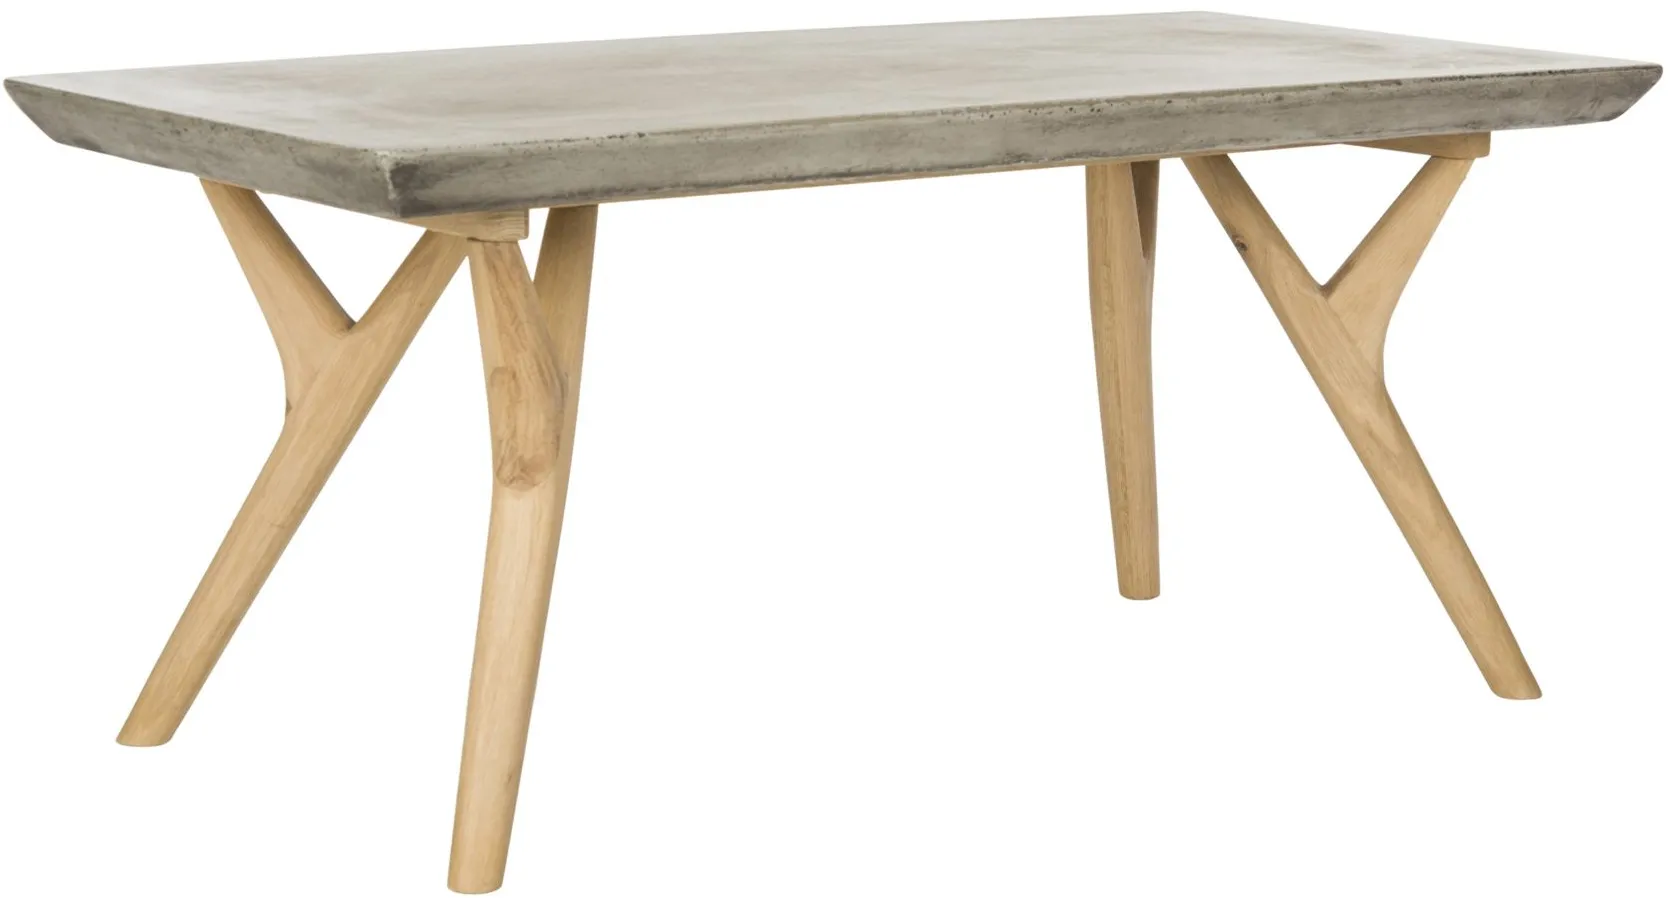 Pacey Indoor/Outdoor Coffee Table in Gray by Safavieh